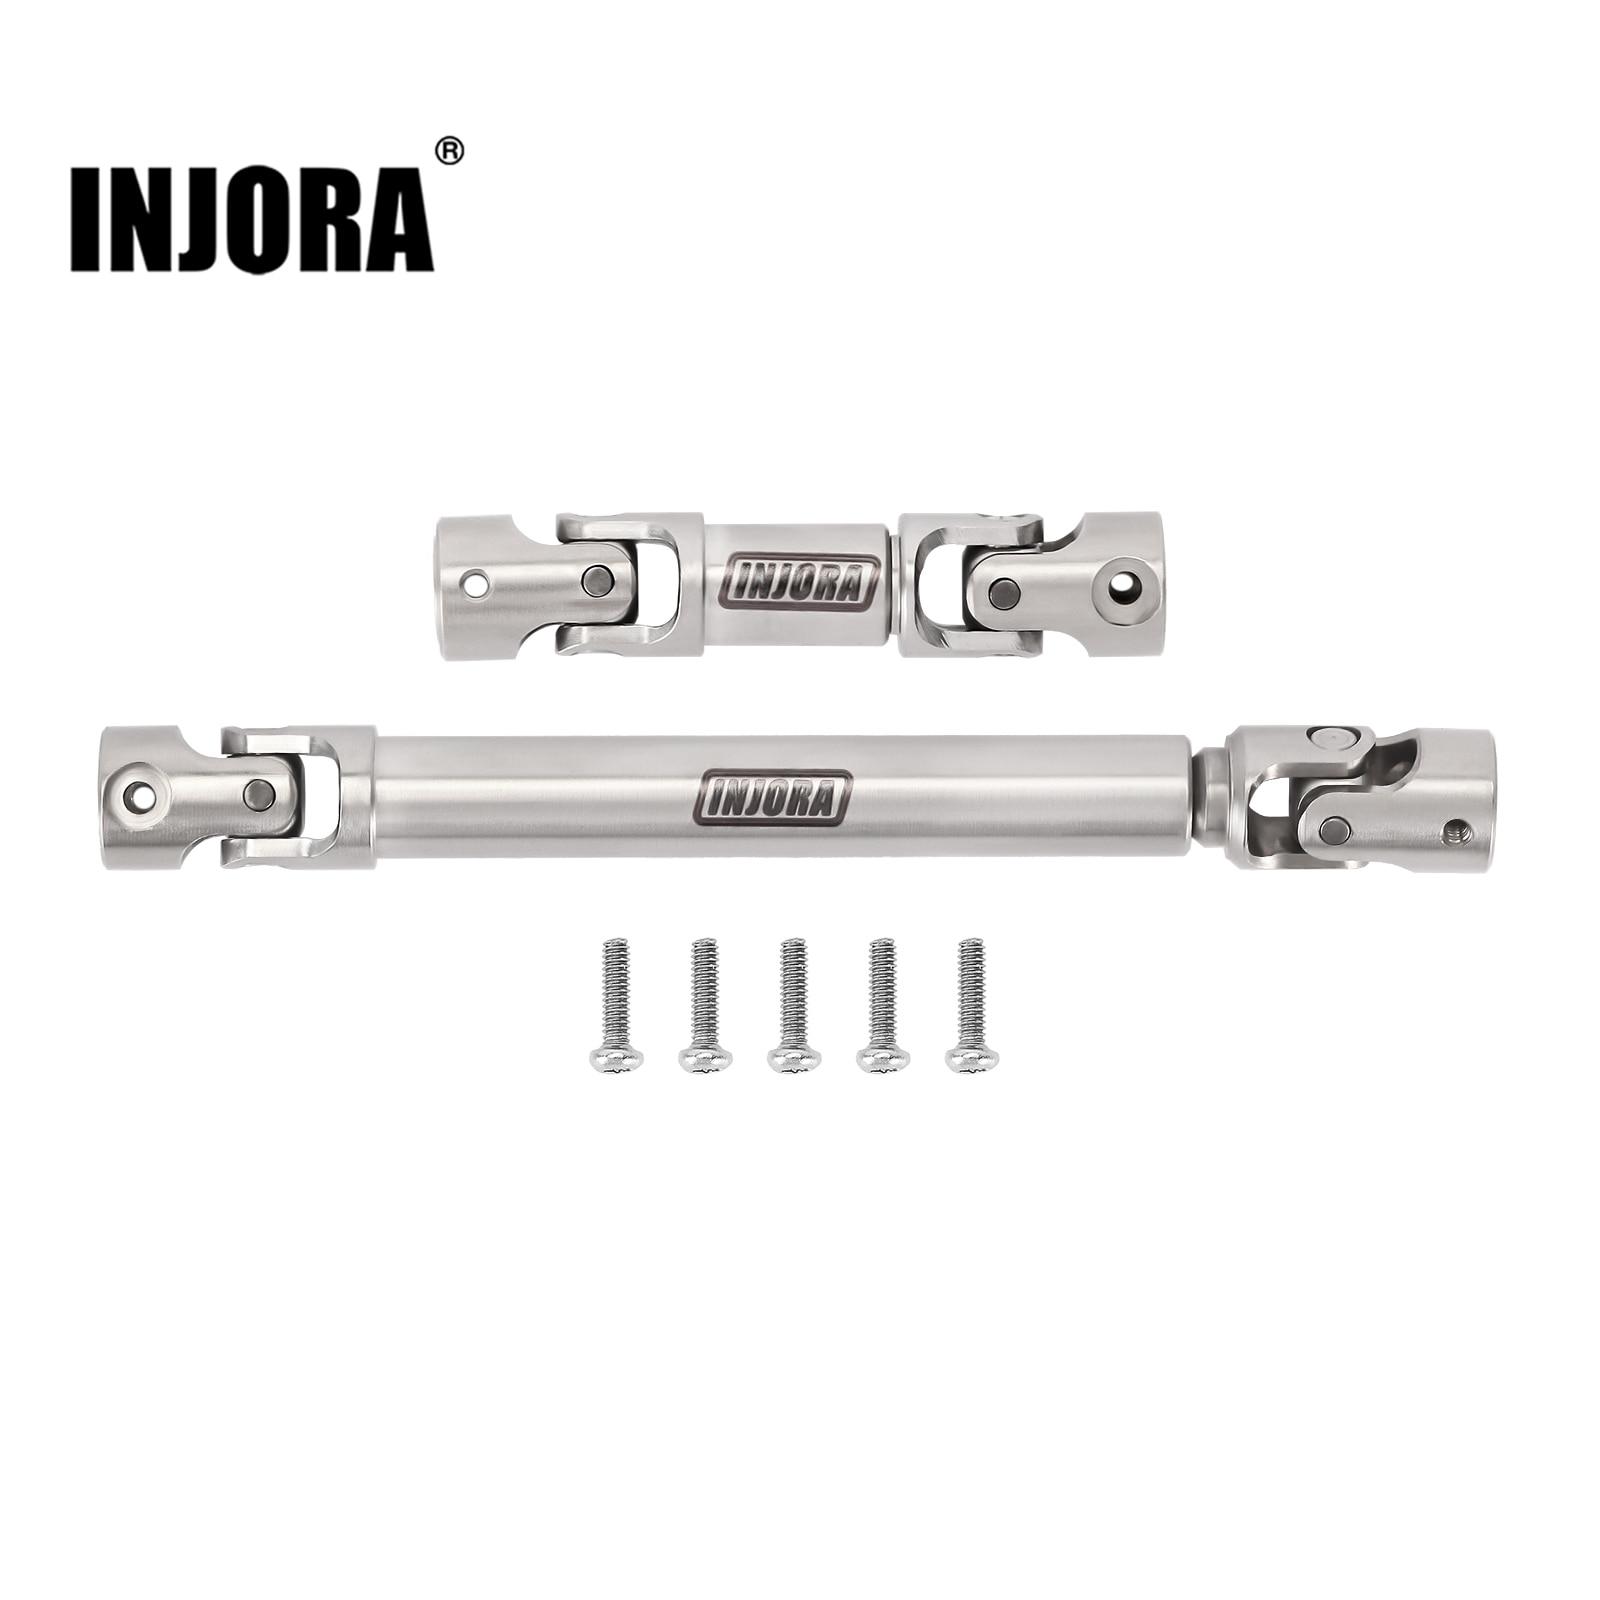 INJORA-Stainless-Steel-Center-Drive-Shaft-D-Shaped-Hole-For-1-24-RC-Crawler-Axial-SCX24.jpg